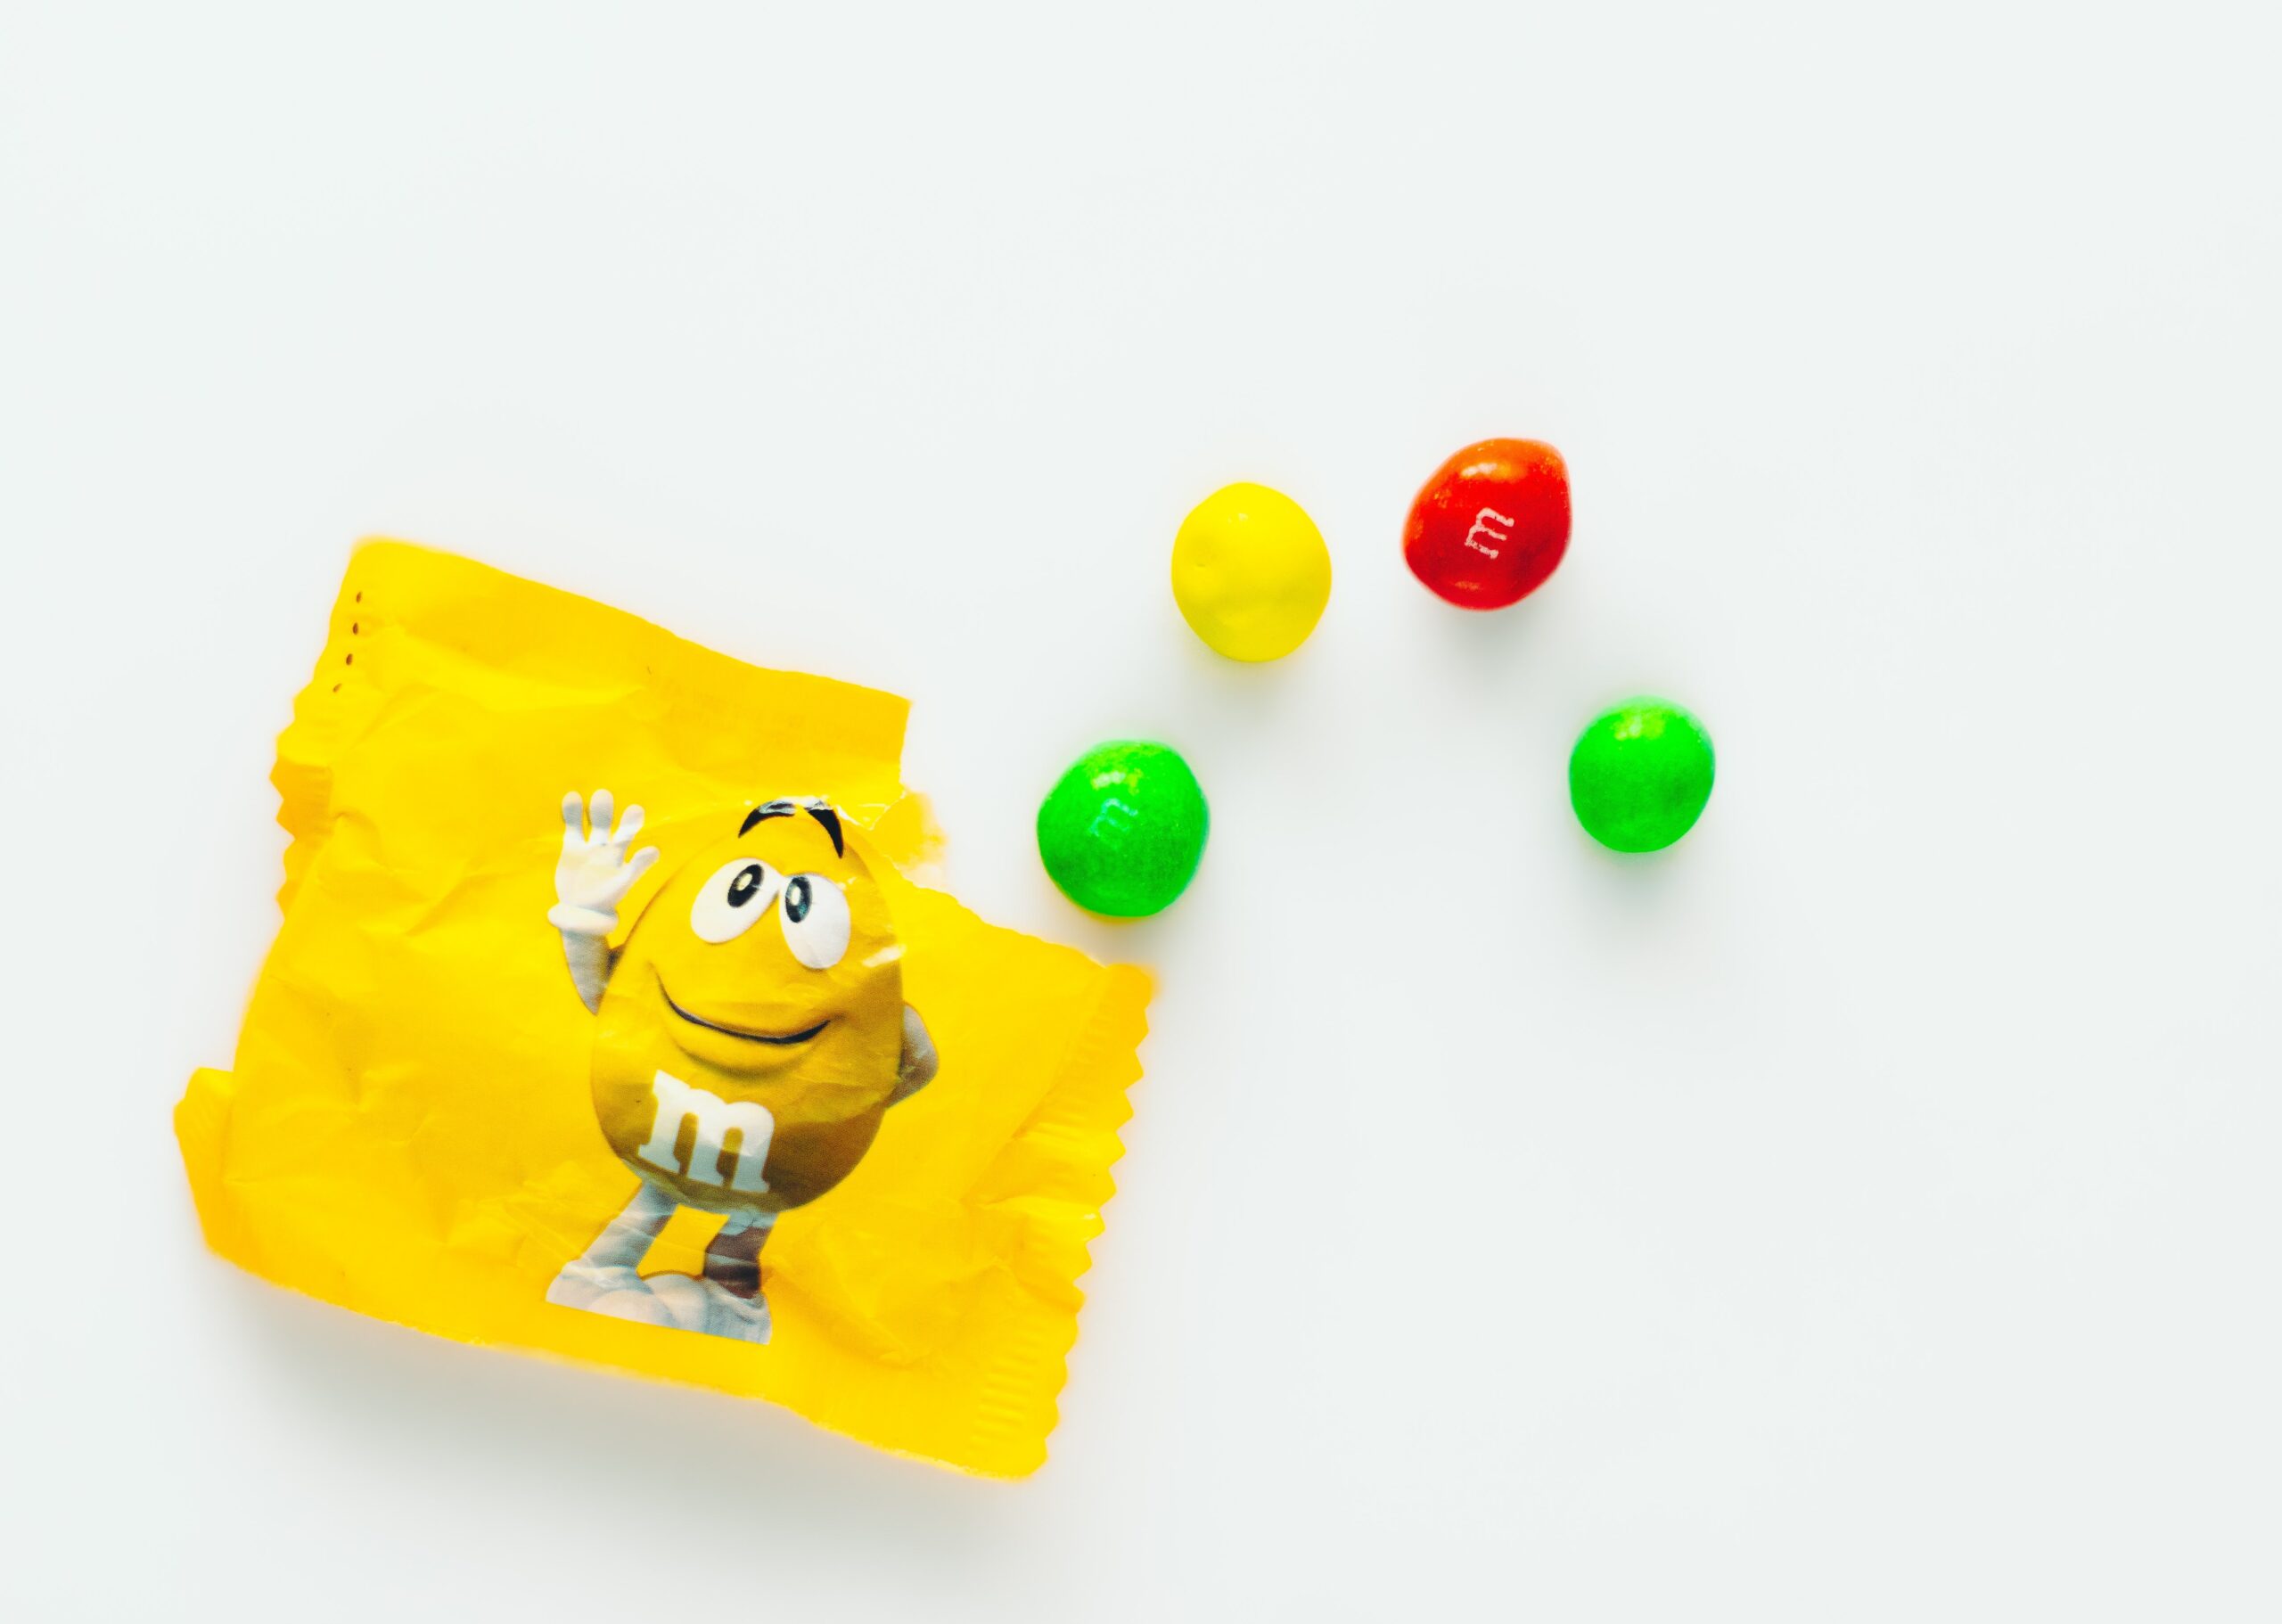 M&Ms' beloved characters are getting a new look